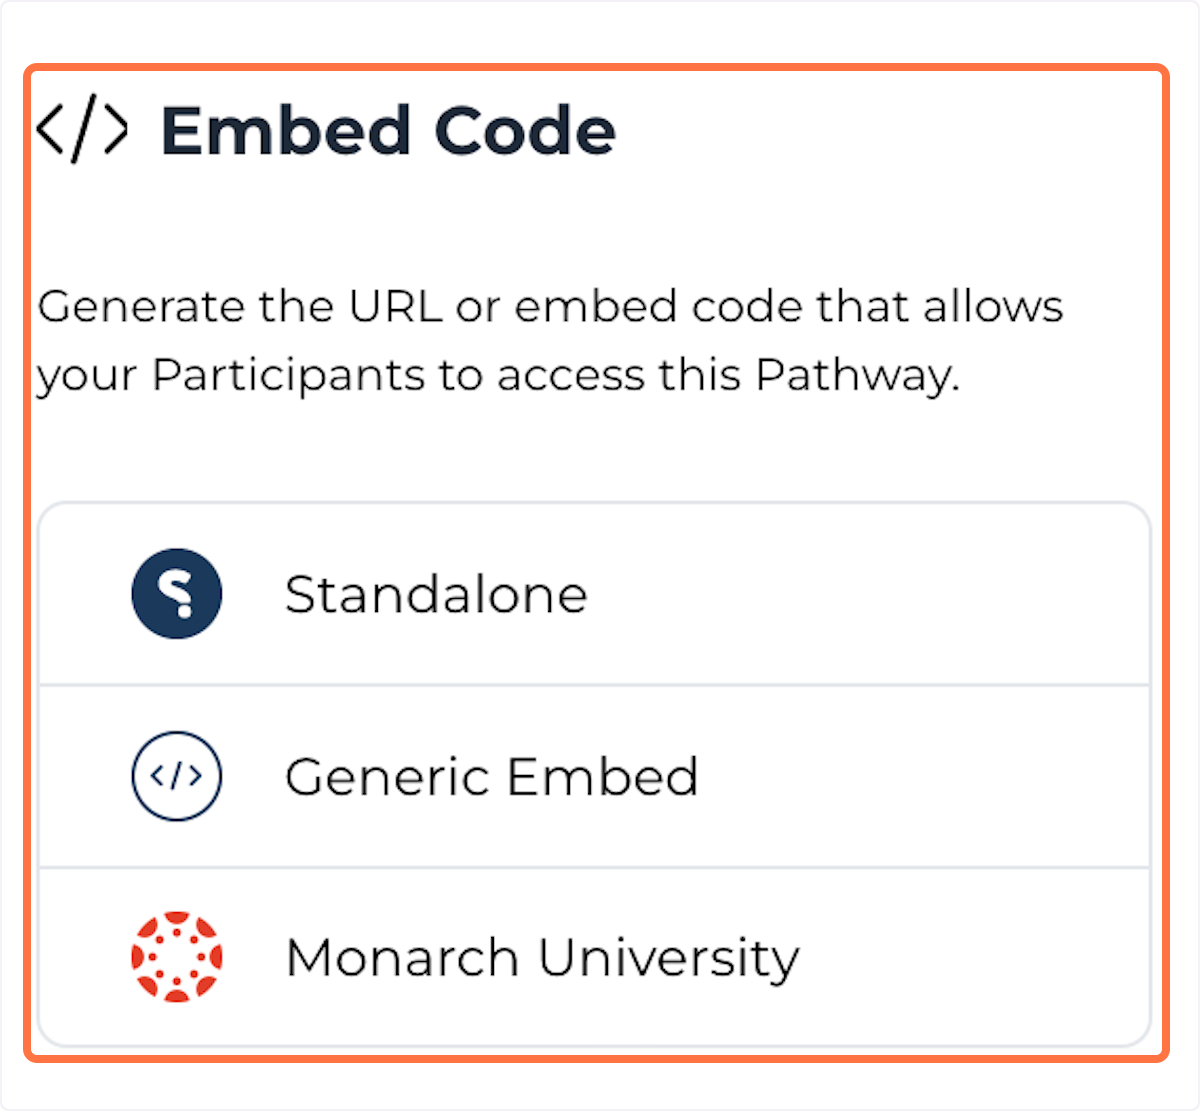 Once you have accessed the Pathway Editor screen, navigate to the Embed Code panel, and select the relevant option to generate the embed code.